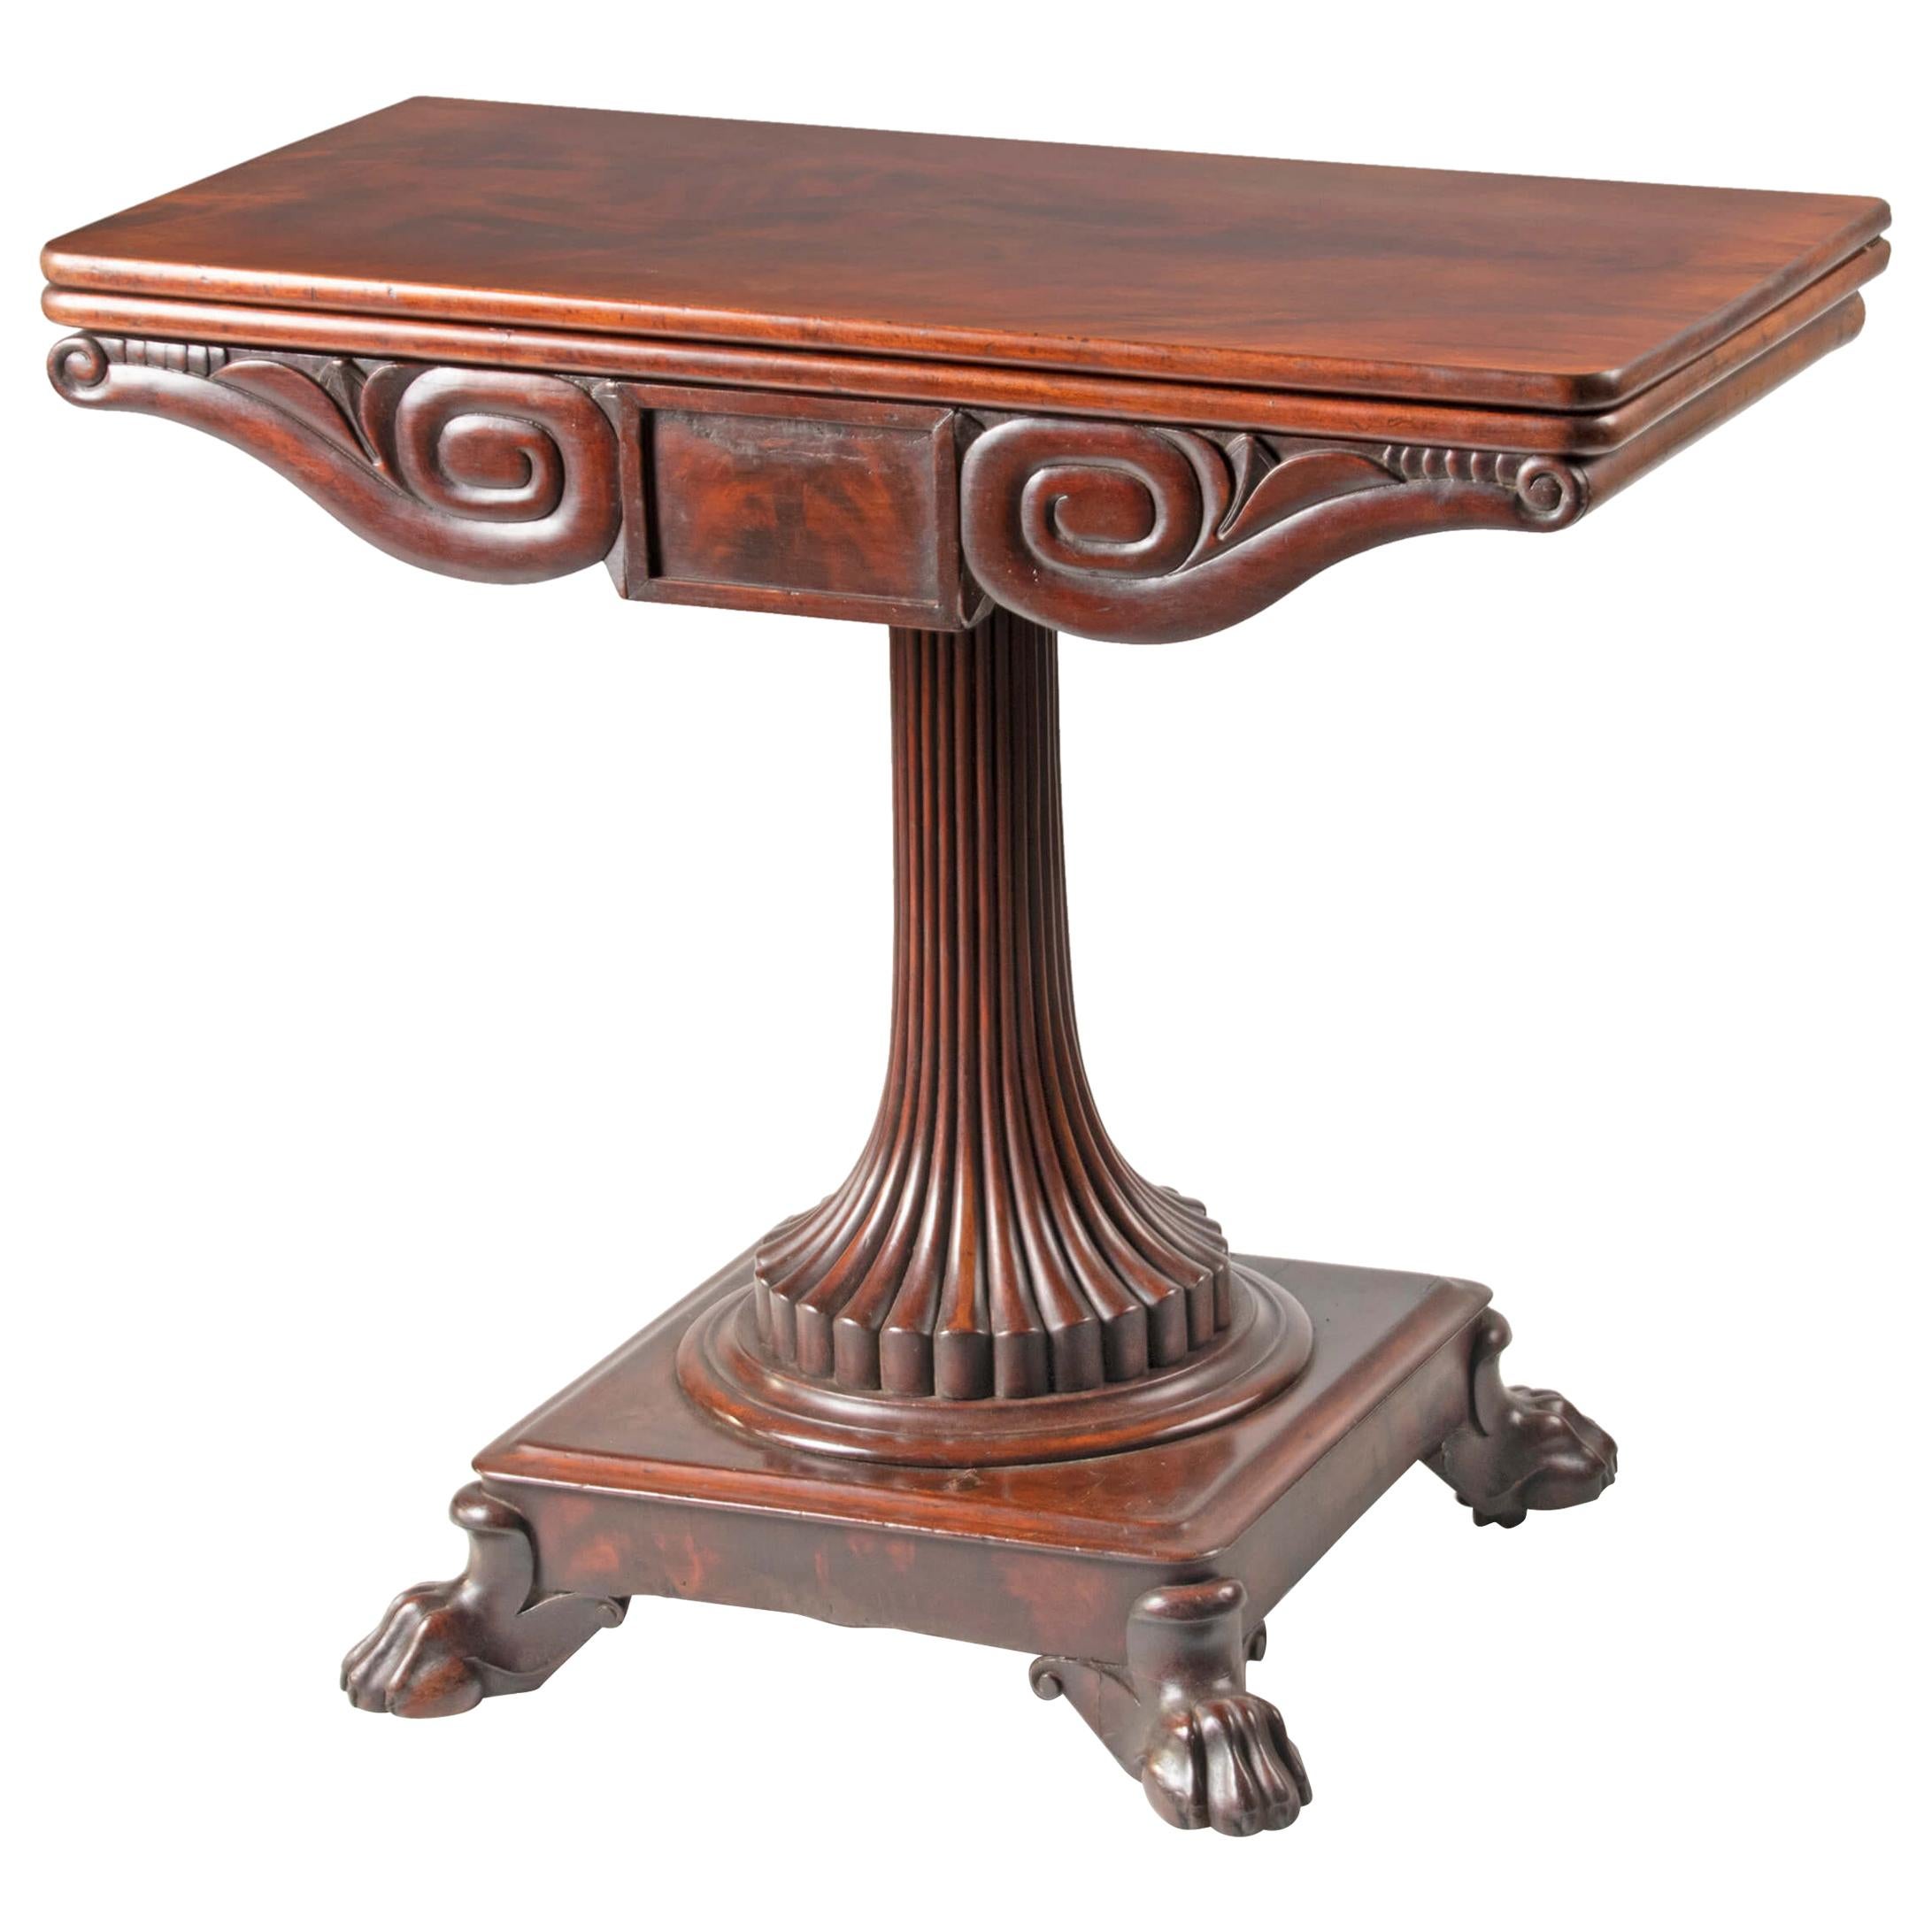 19th Century English Mahogany Regency Flip Top Game Table and Side Table